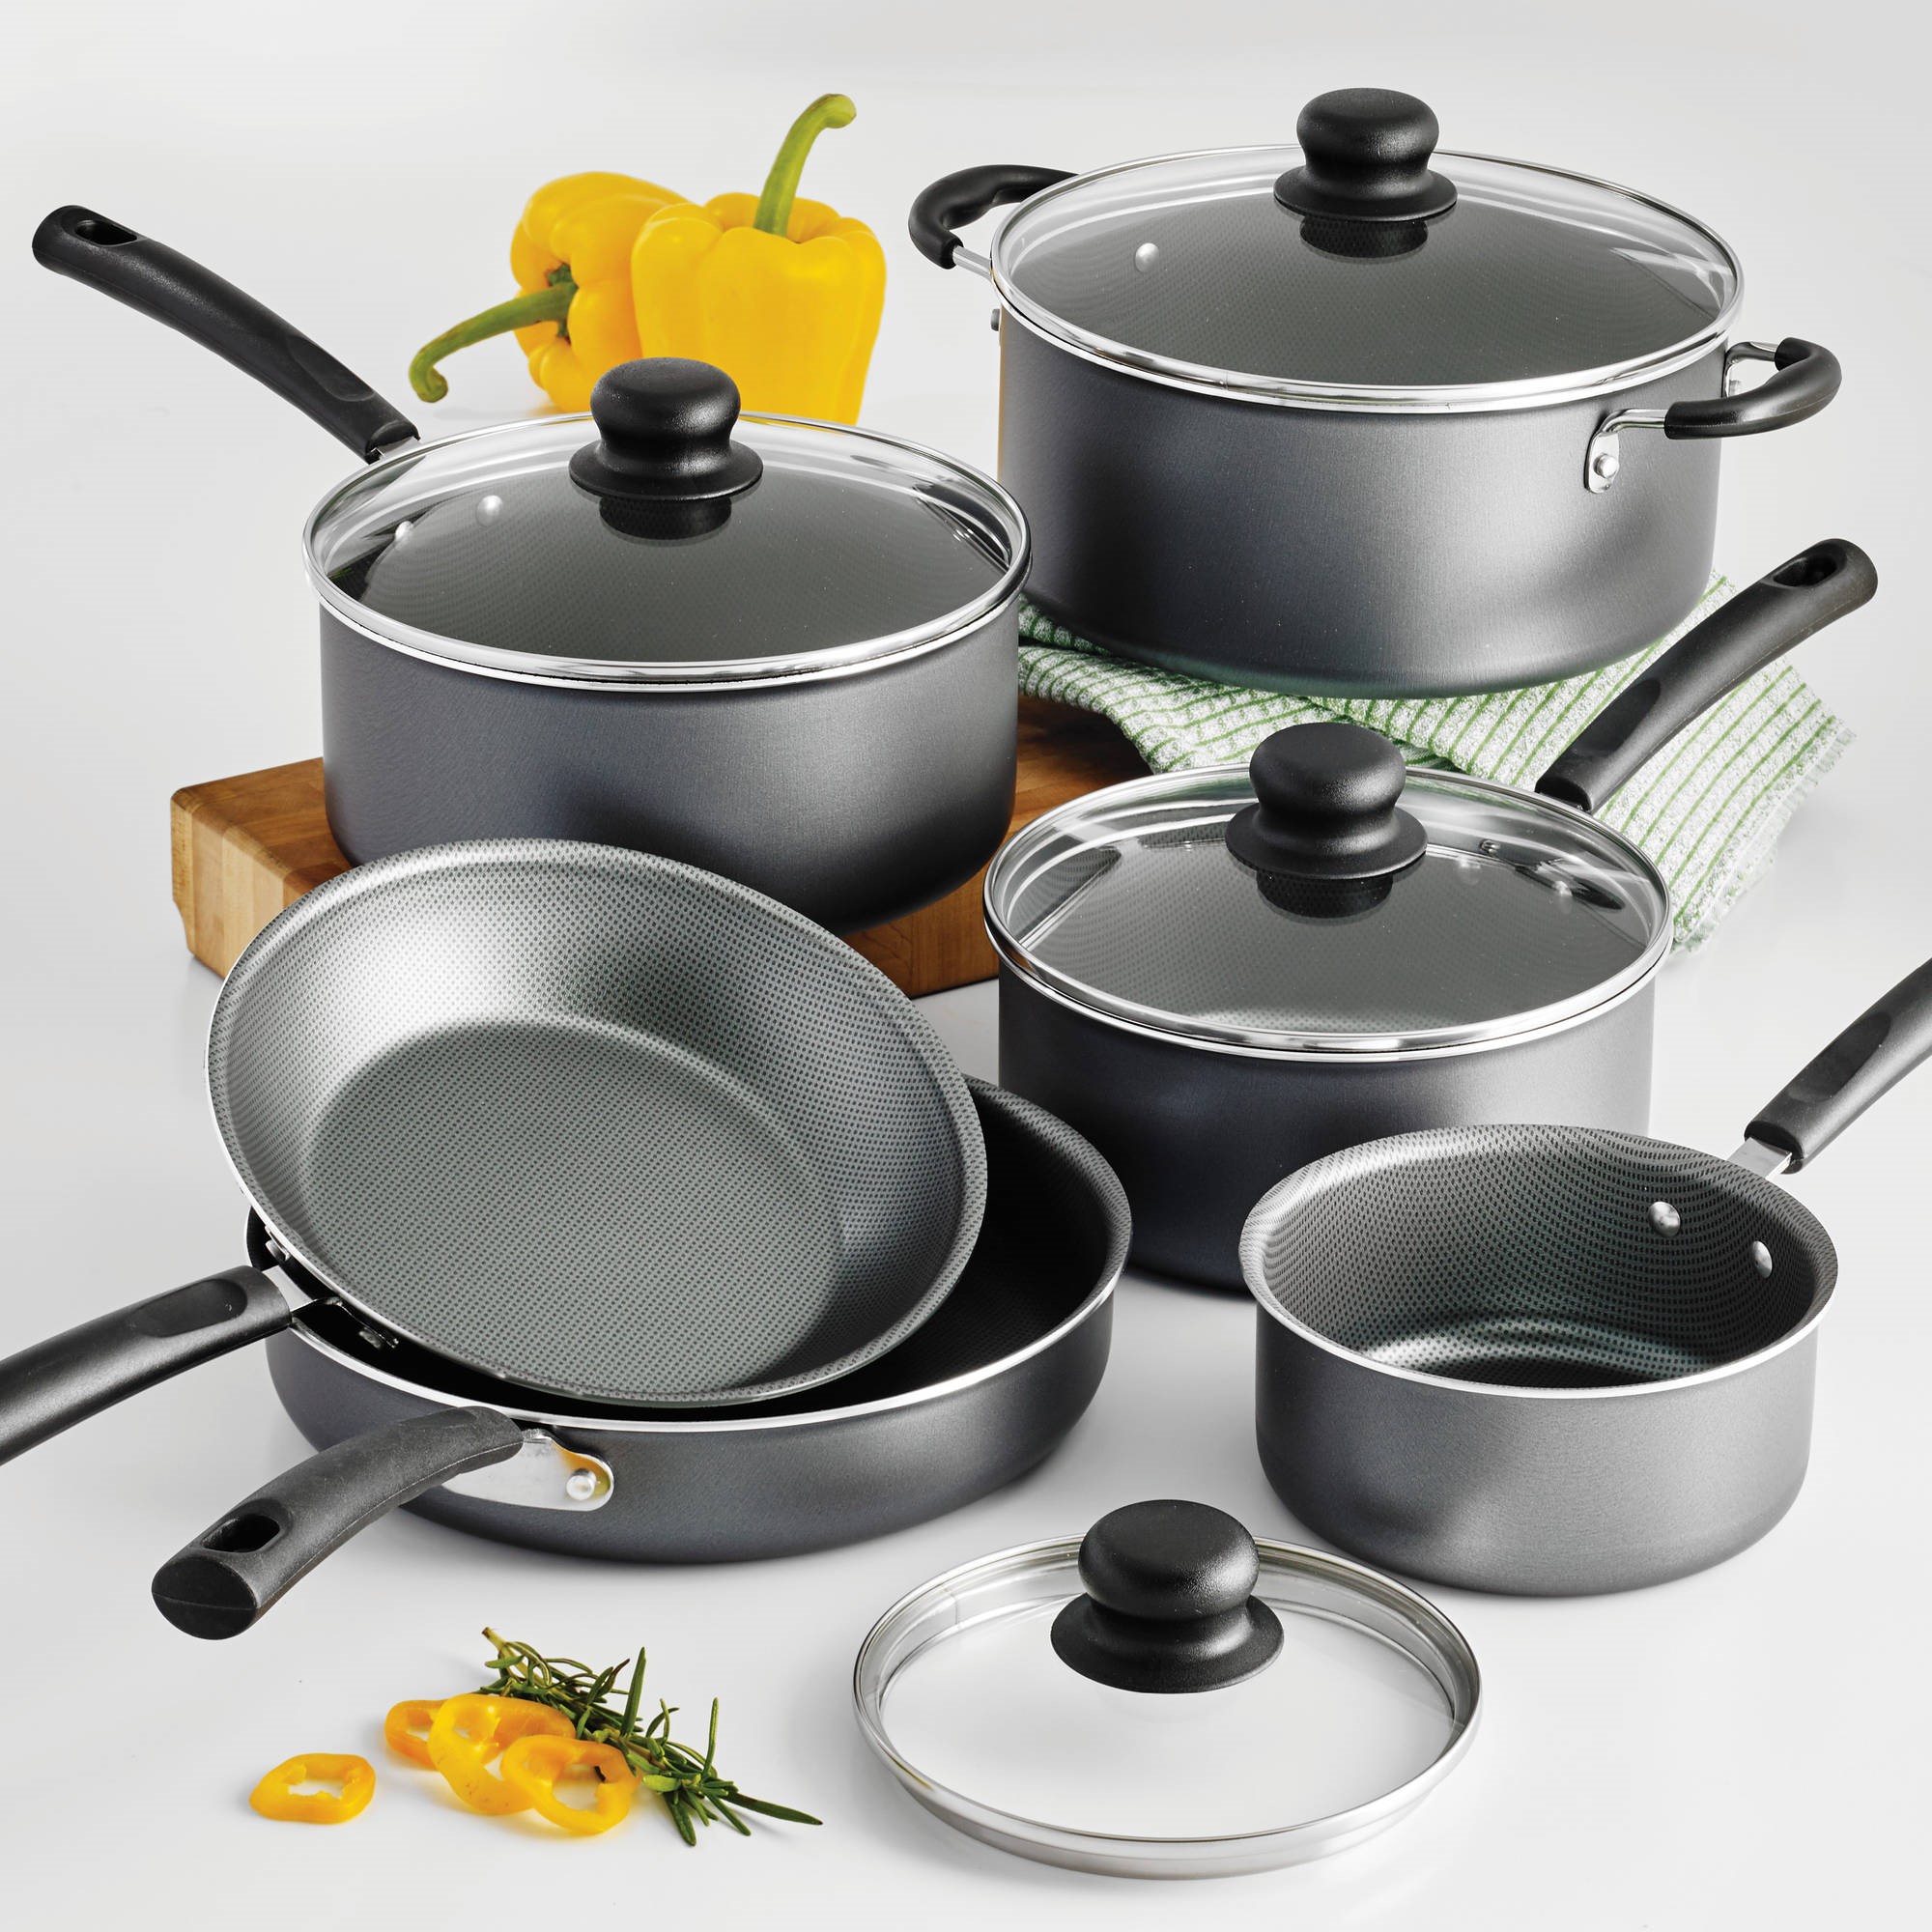 Tramontina Primaware Non-stick Cookware Set, 10 Piece - image 5 of 7